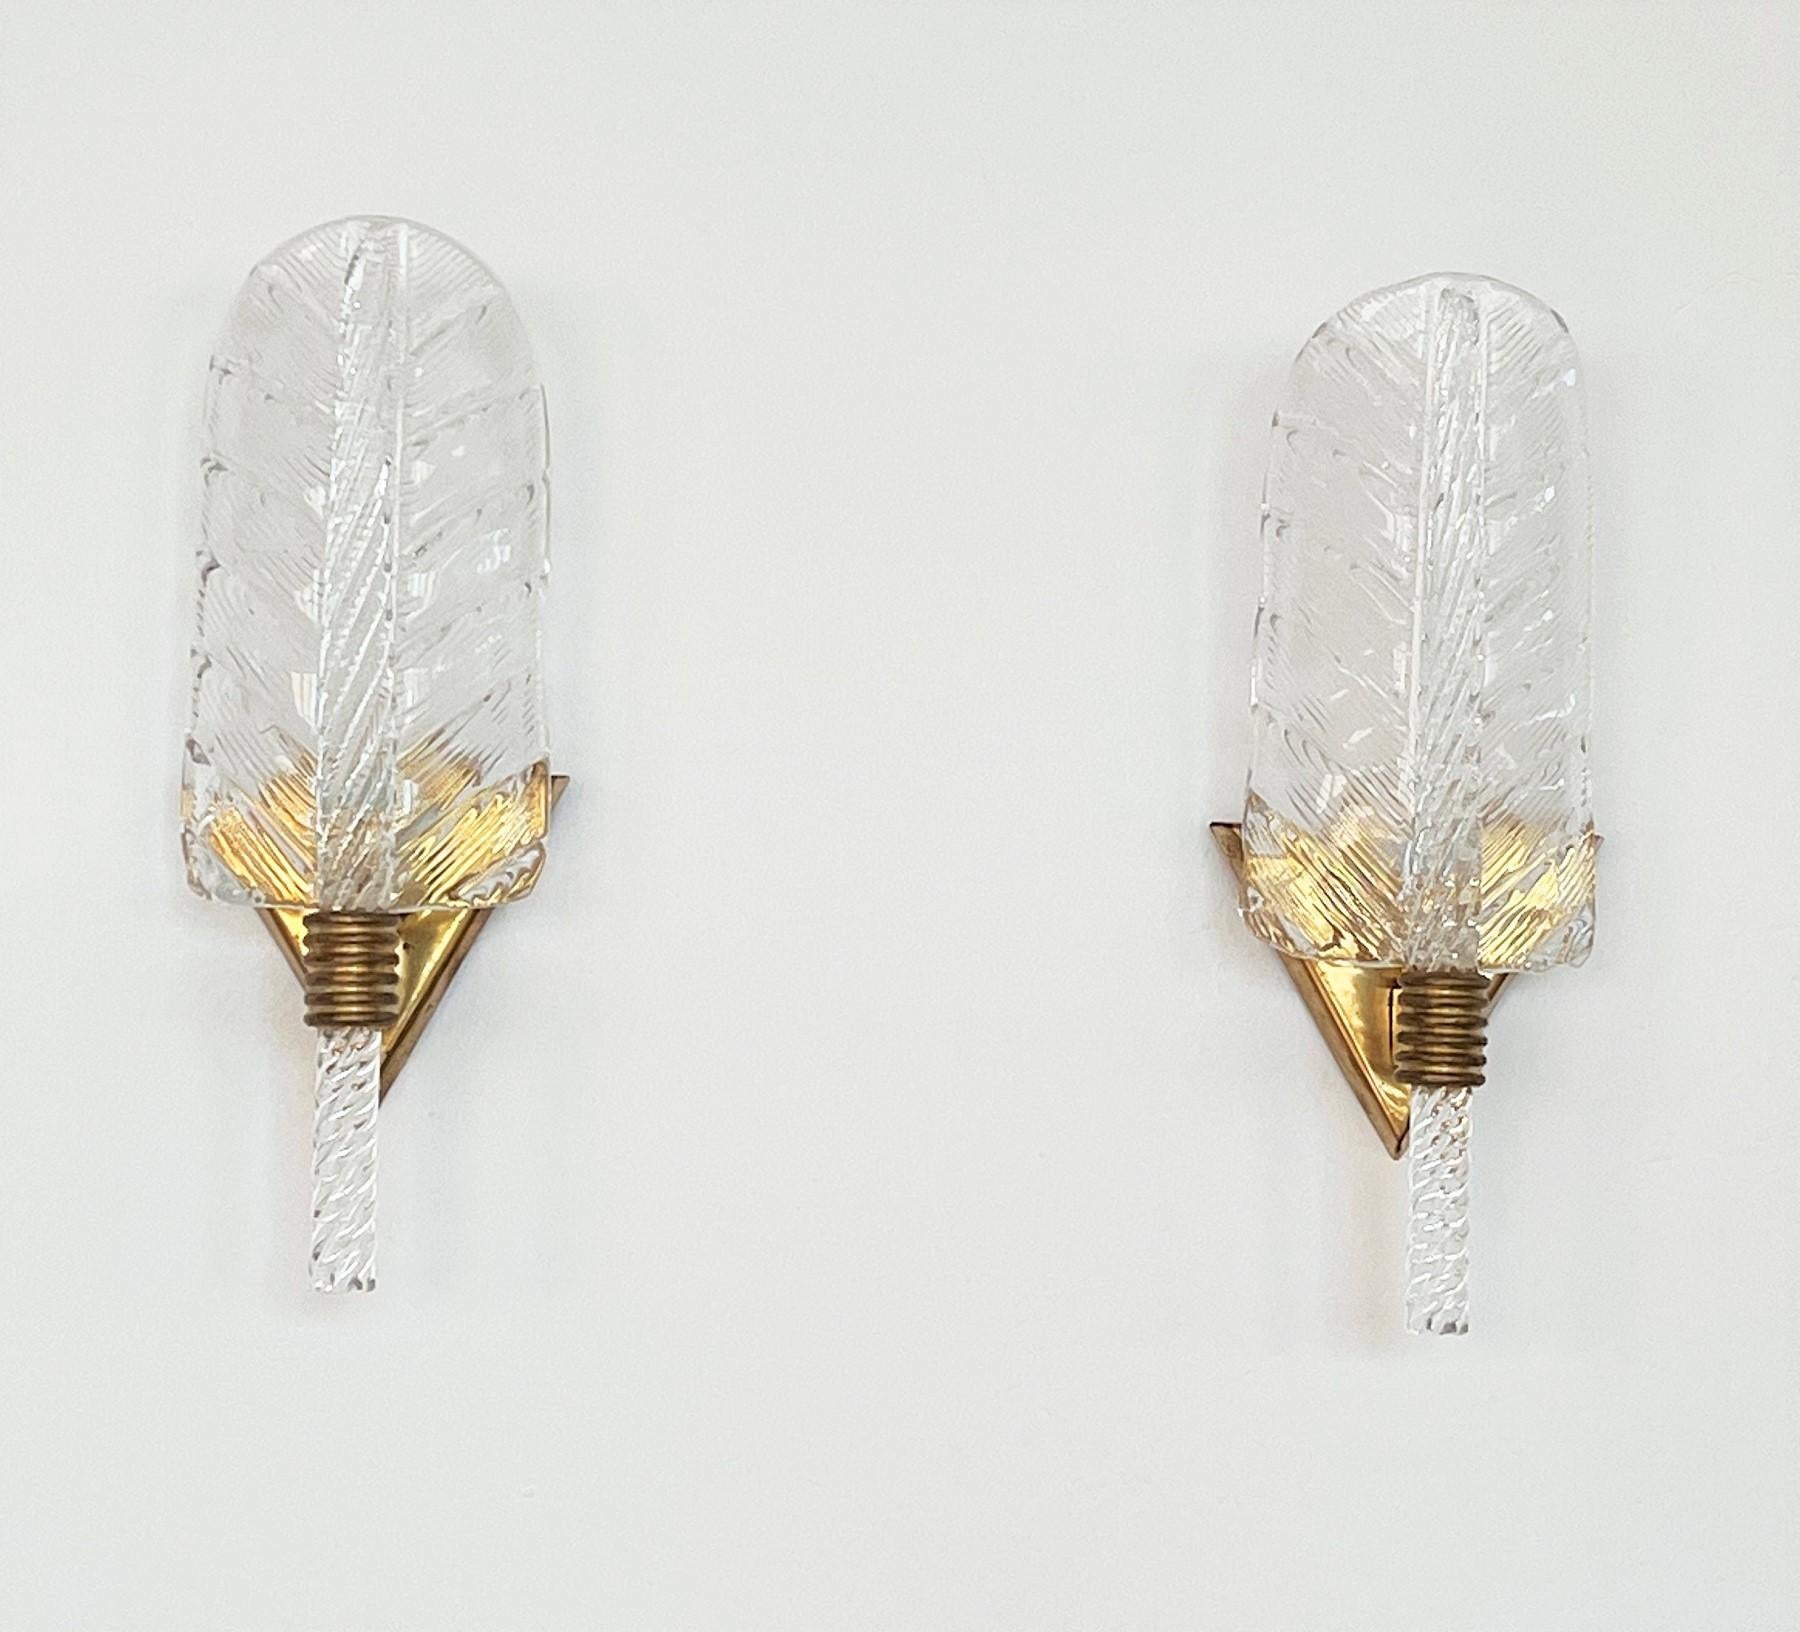 Italian Brass and Murano Glass Leaves Wall Lights in Barovier Toso Style, 1990s For Sale 5